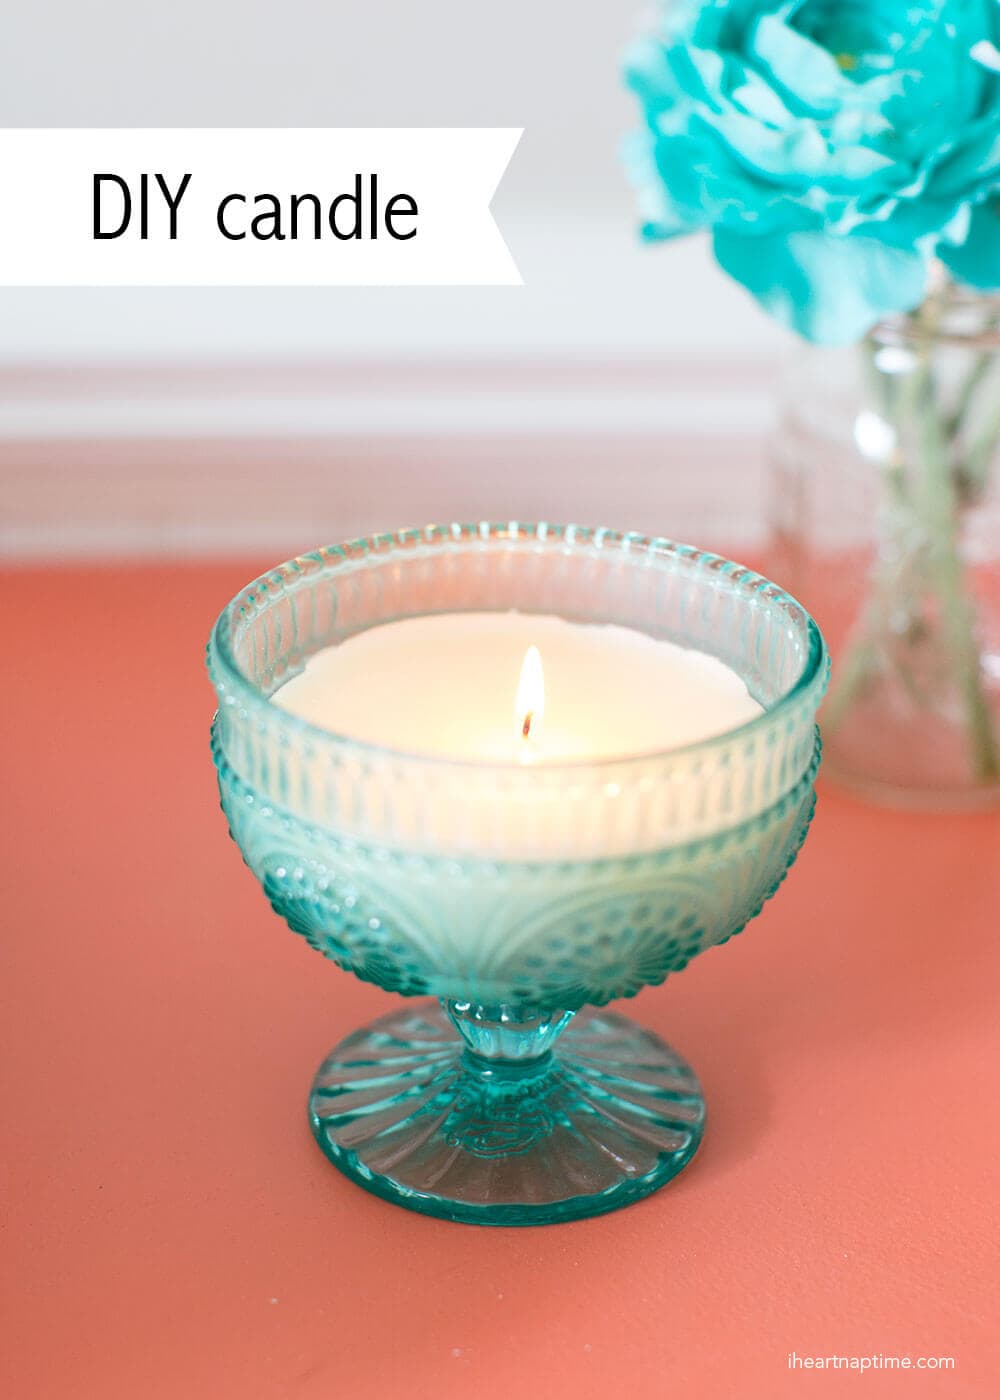 Homemade candles using cute jars and wax cubes. Super simple DIY craft to make and you can choose your own scent. Would make a nice Mother's Day gift. 